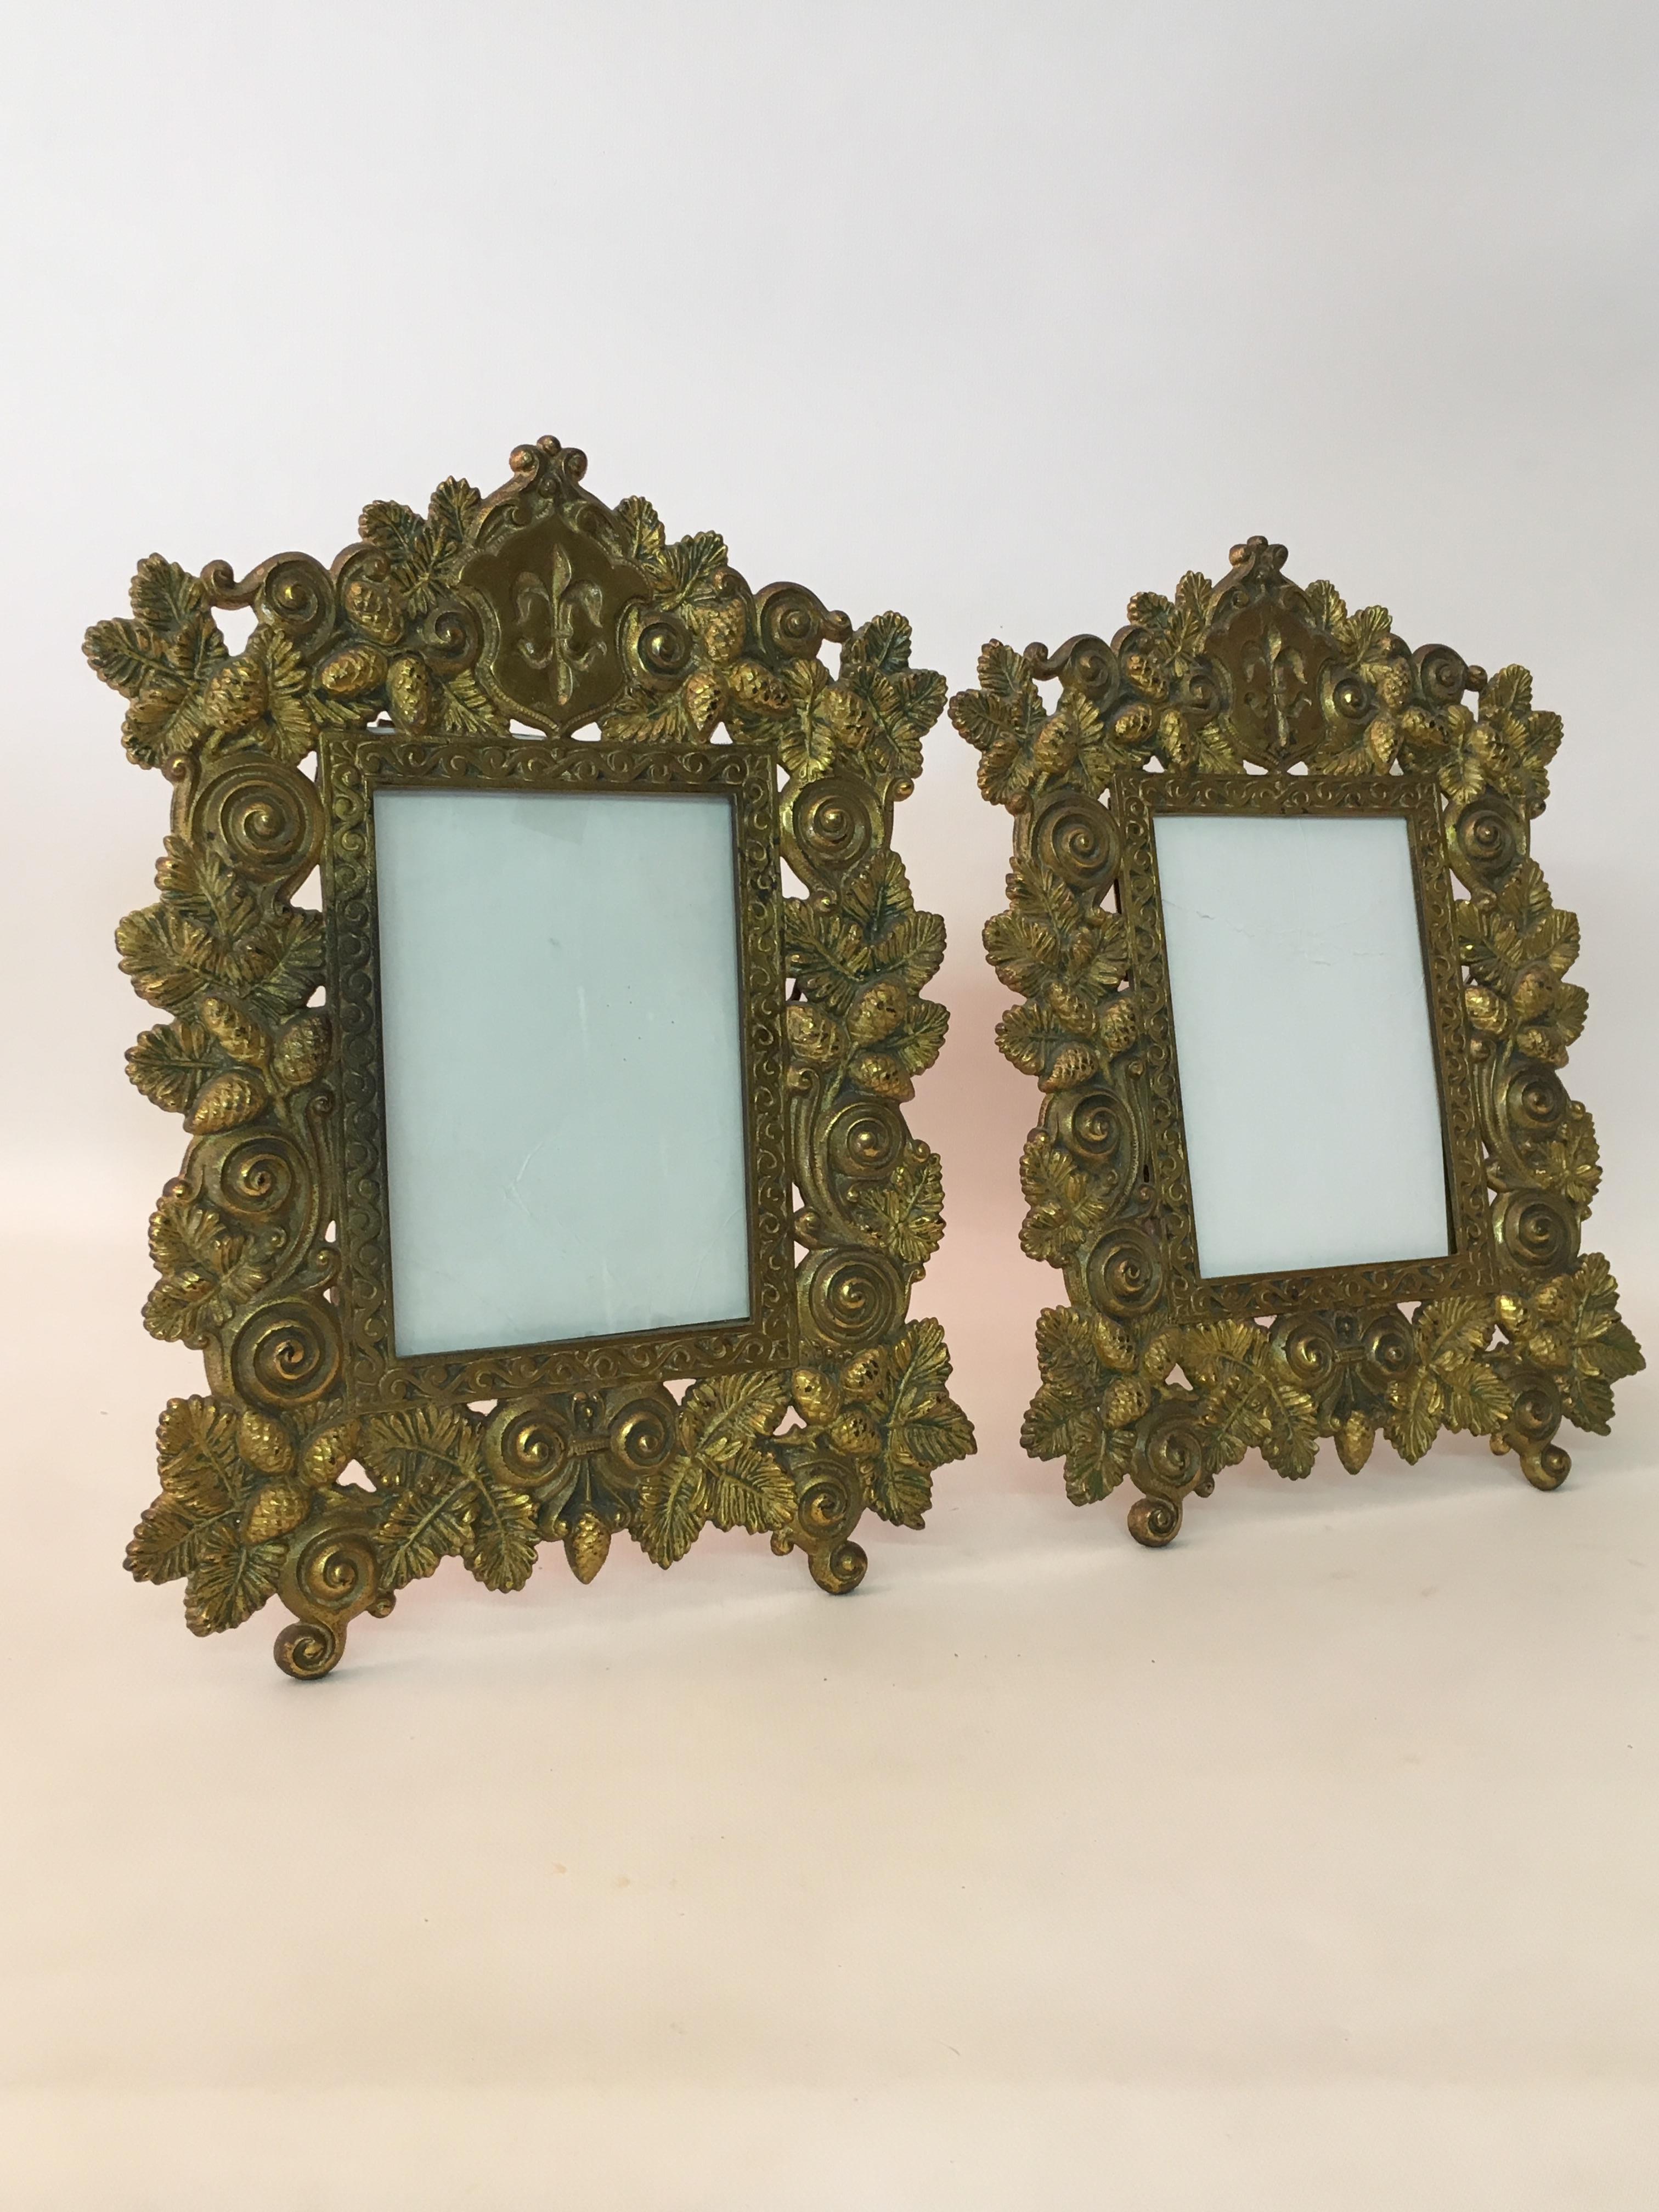 Pair of finely cast brass signed Bradley and Hubbard standing picture frames. Both feature a fleur de lis cartouche motif and adorned with leaf and pine cone decoration, circa 1910-1920. Very good condition. #2123.

Sight dimensions are 6.13